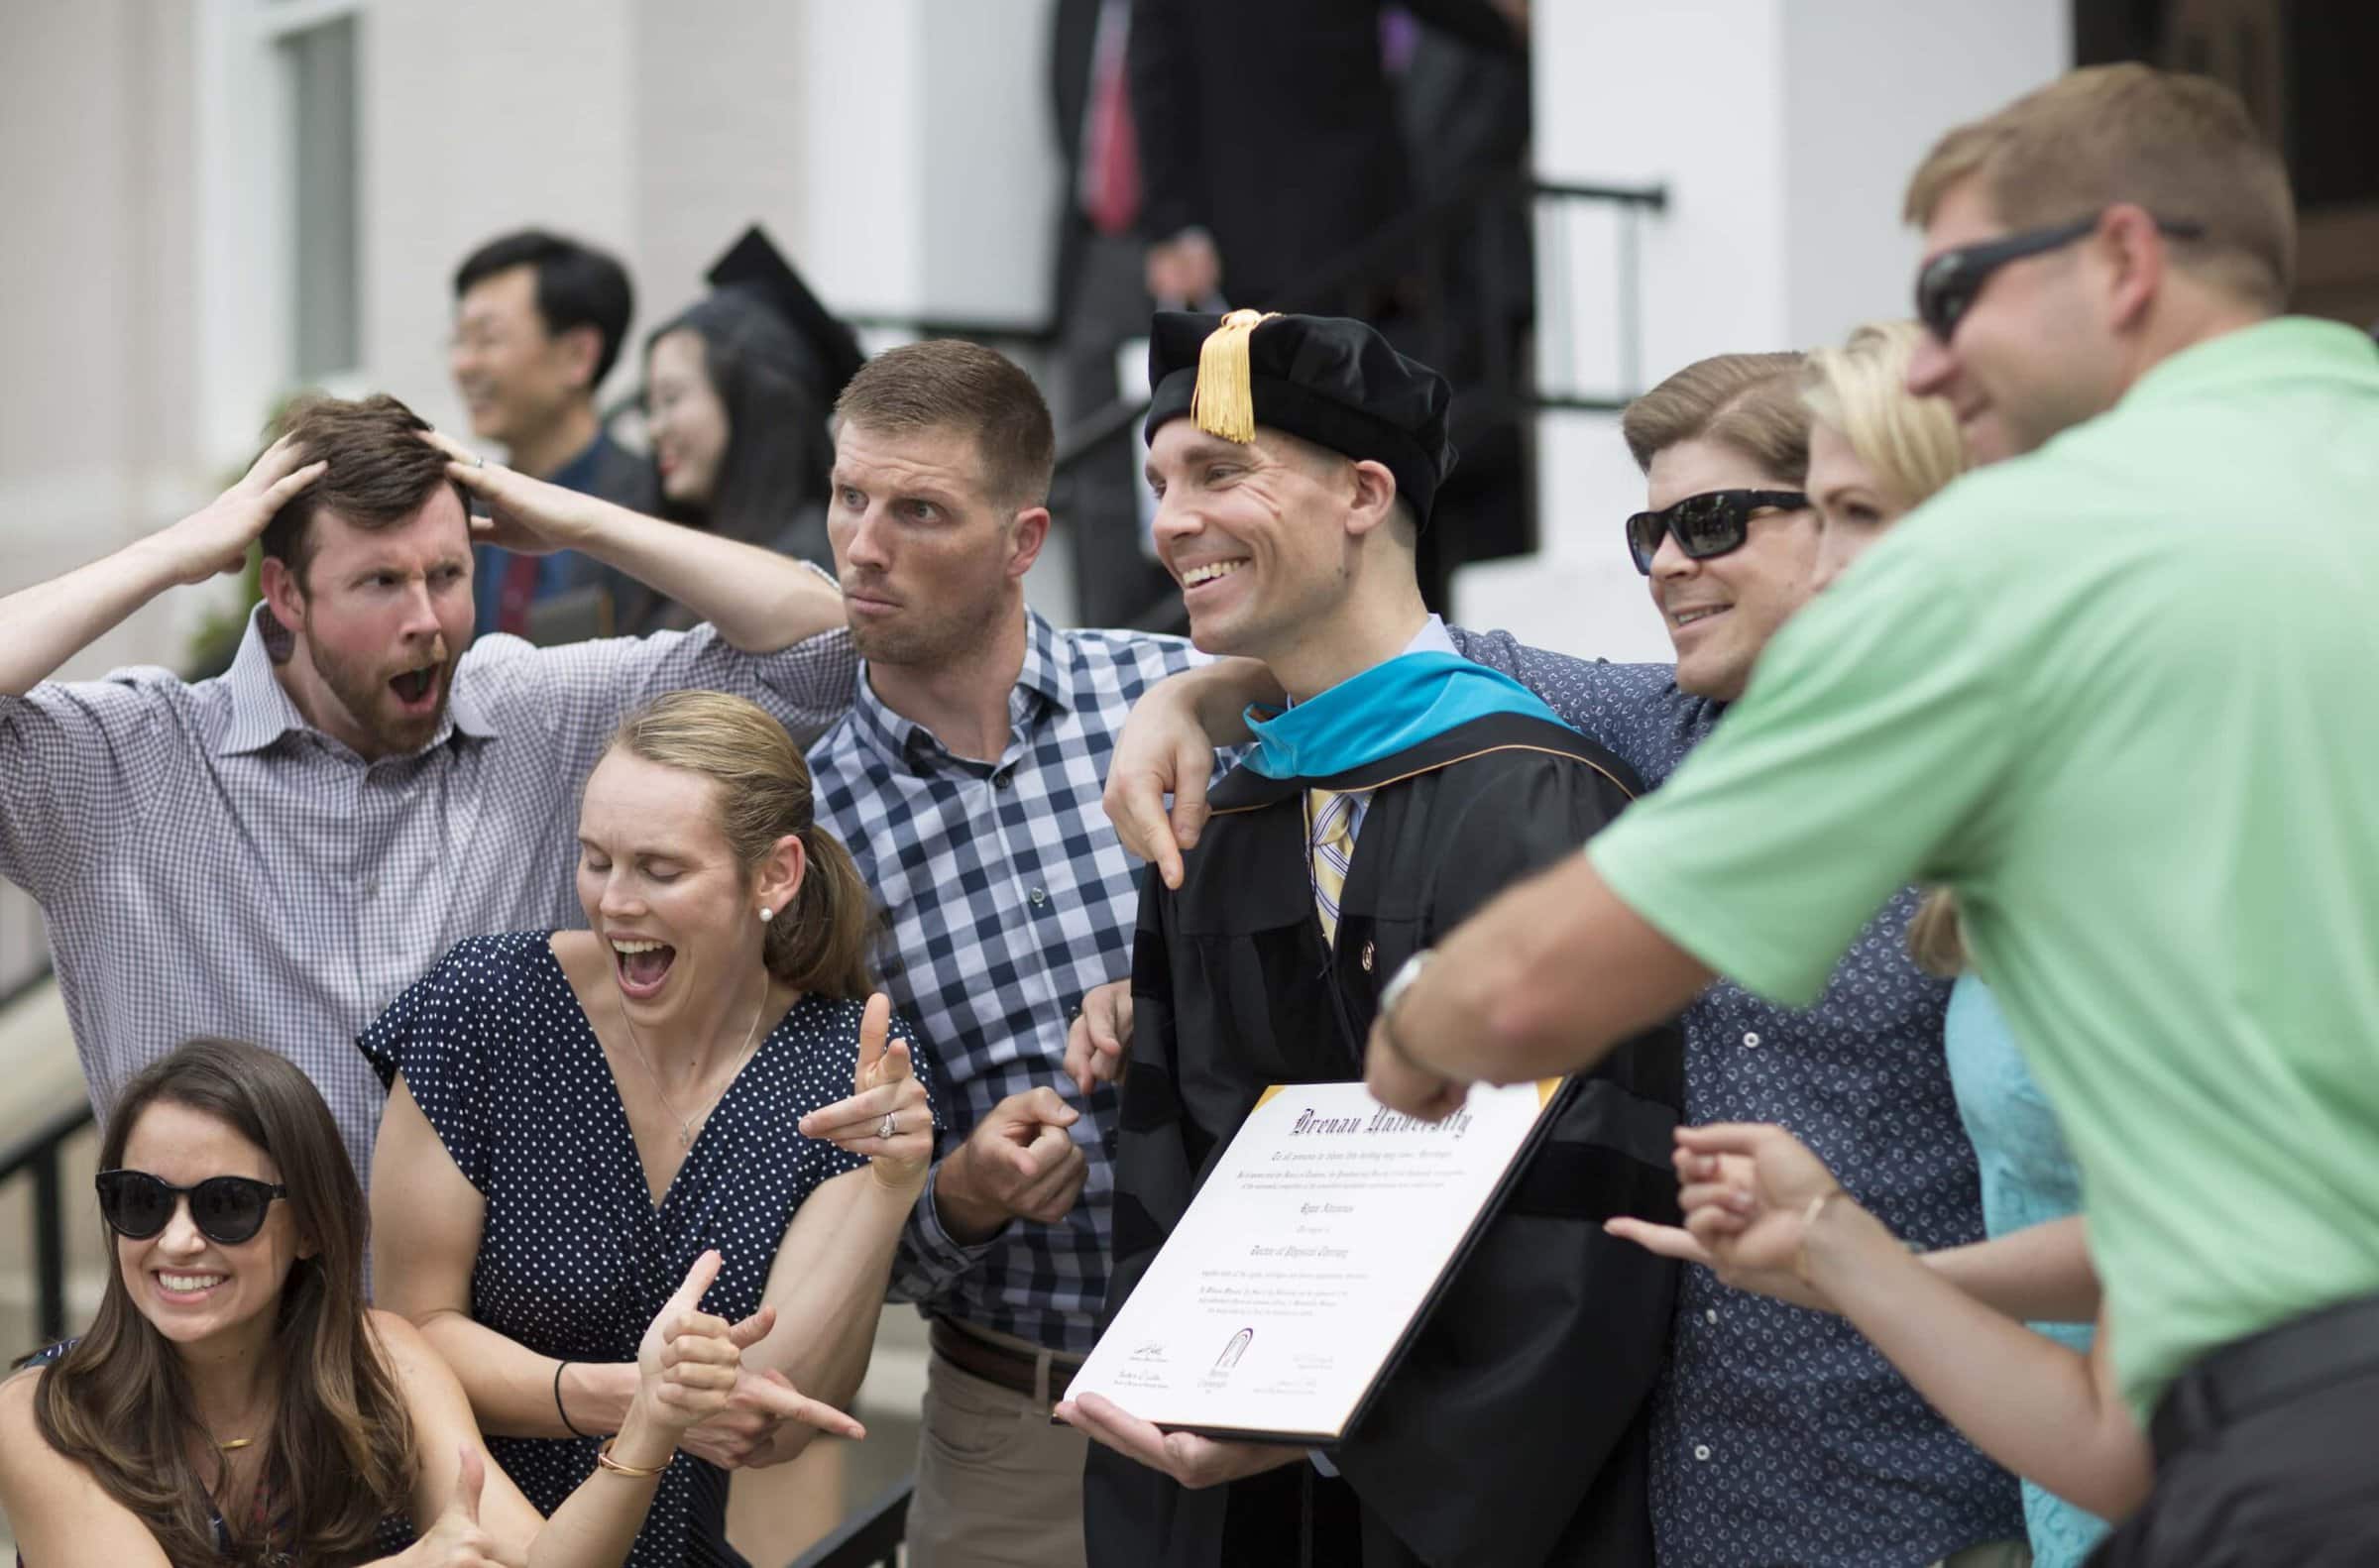 Ryan Ahlenius (center), one of the first graduates from Brenau University with a Doctor of Physical Therapy, jokes with friends following the 2018 Spring Commencement Ceremony on Saturday, May 5, on Brenau University's historic Gainesville campus. (Nick Bowman for Brenau University)